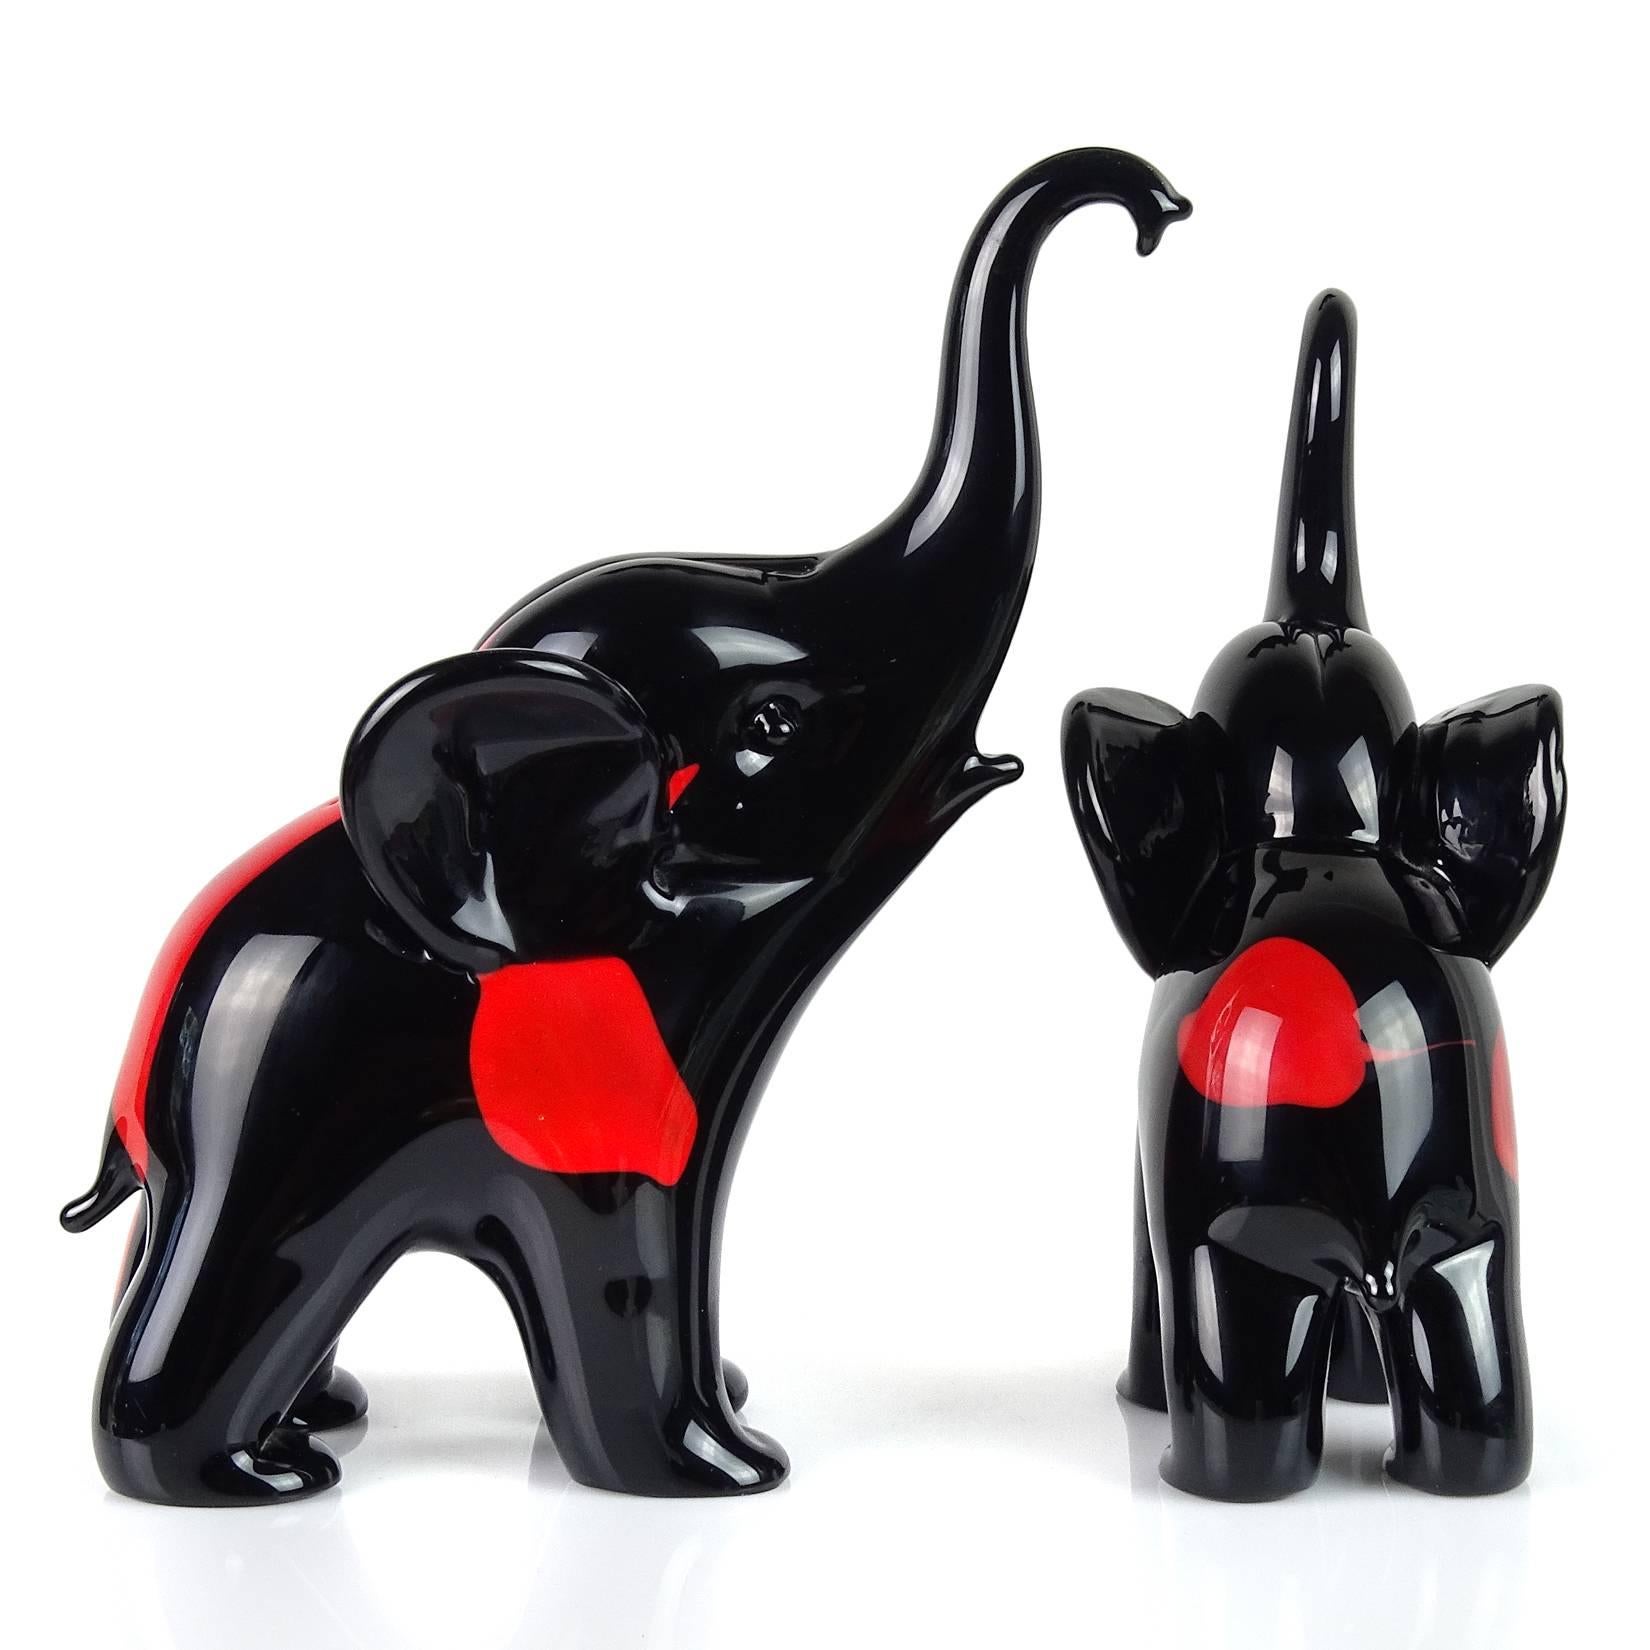 Gorgeous and rare Murano hand blown jet black and bright red spots Italian art glass elephant mom / dad and baby sculptures. Documented to designer Archimede Seguso, signed (both) underneath, from his artistic series. They measure 7 3/4